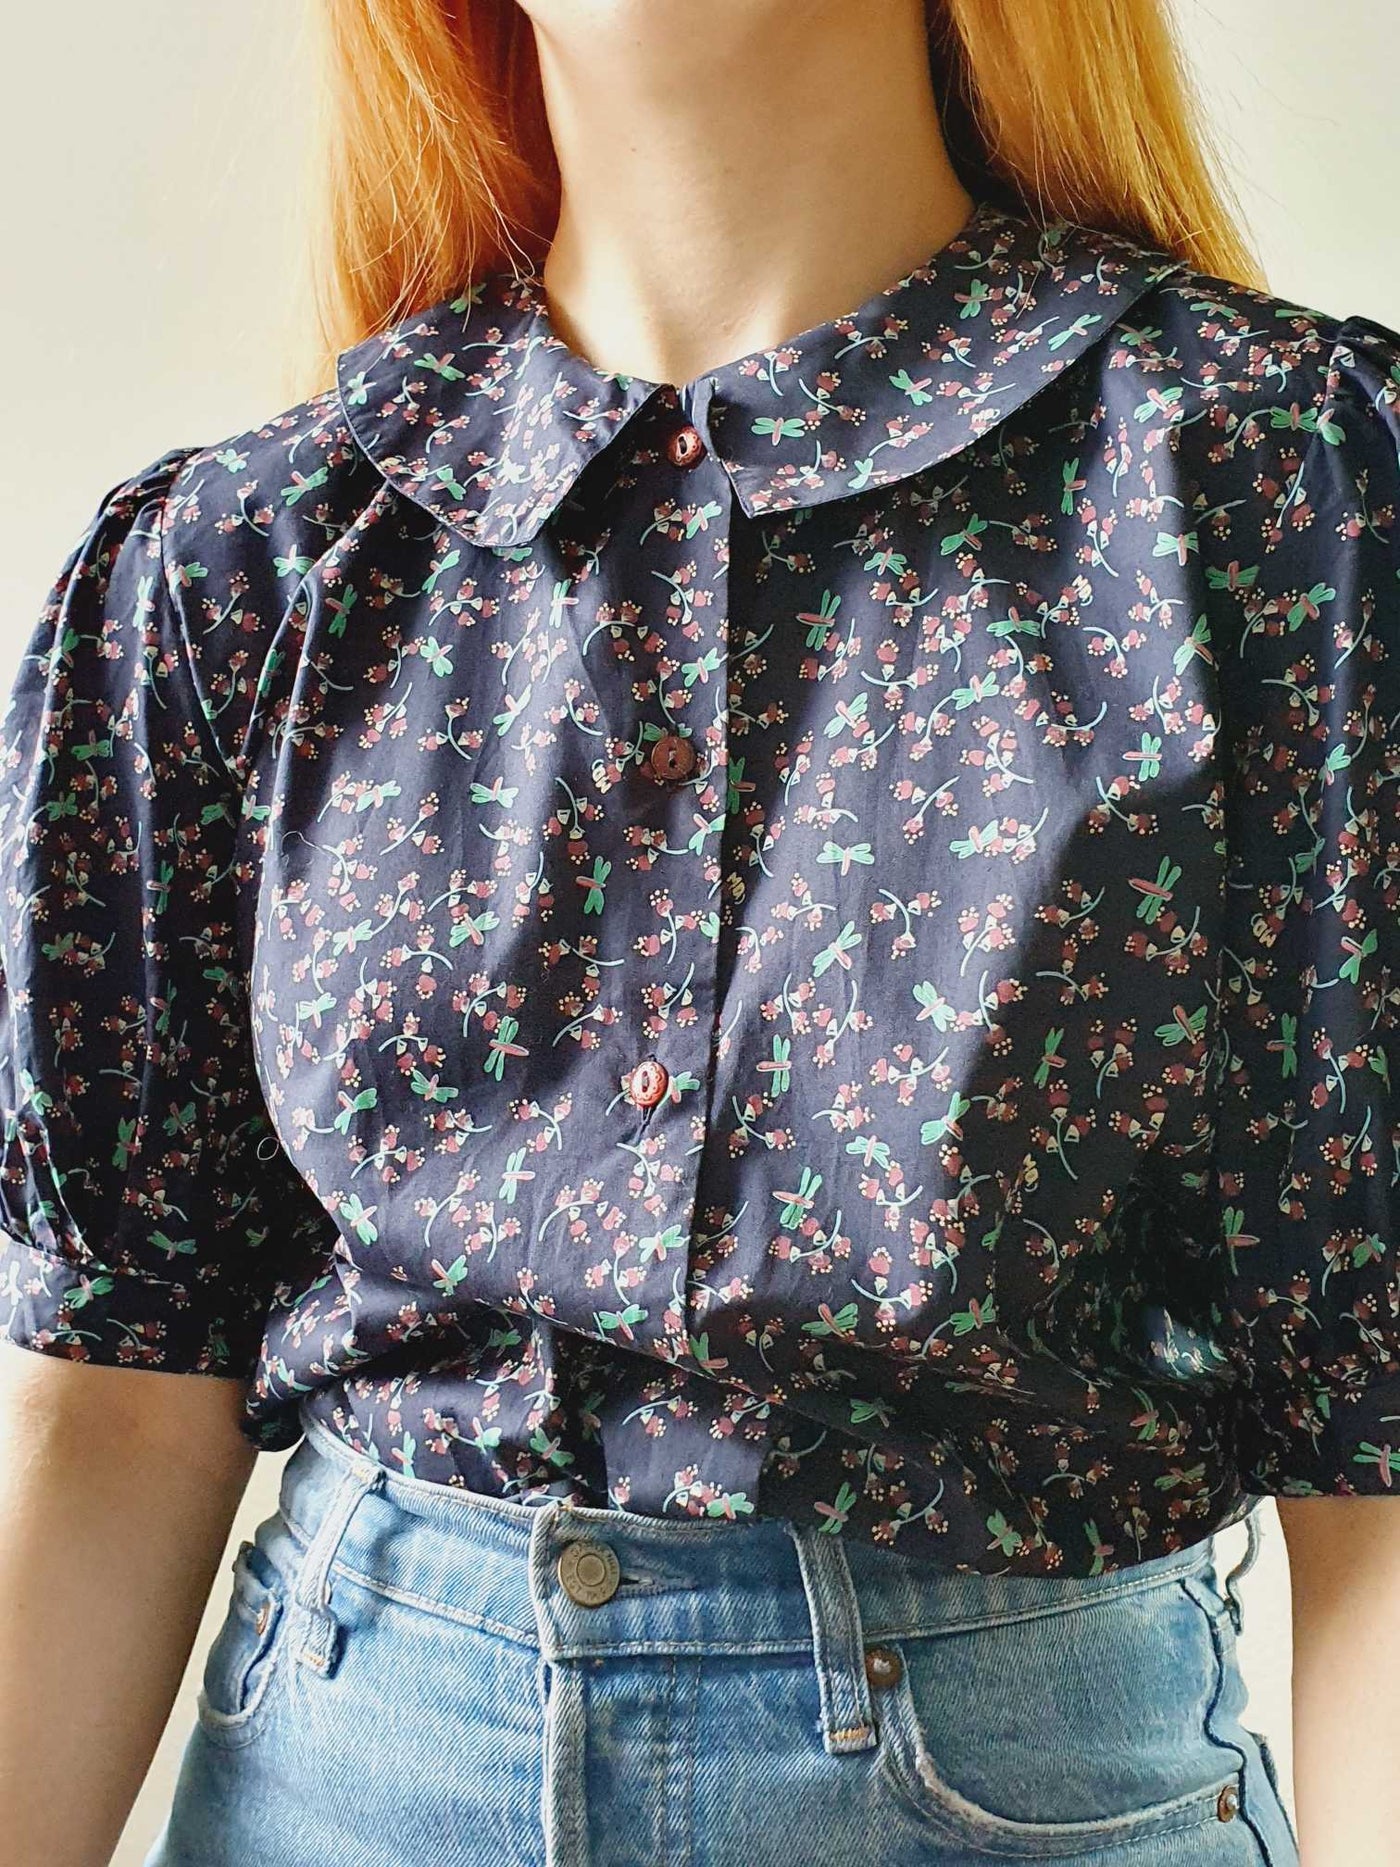 Vintage Navy Floral Puff Sleeve Cotton Blouse - S/M